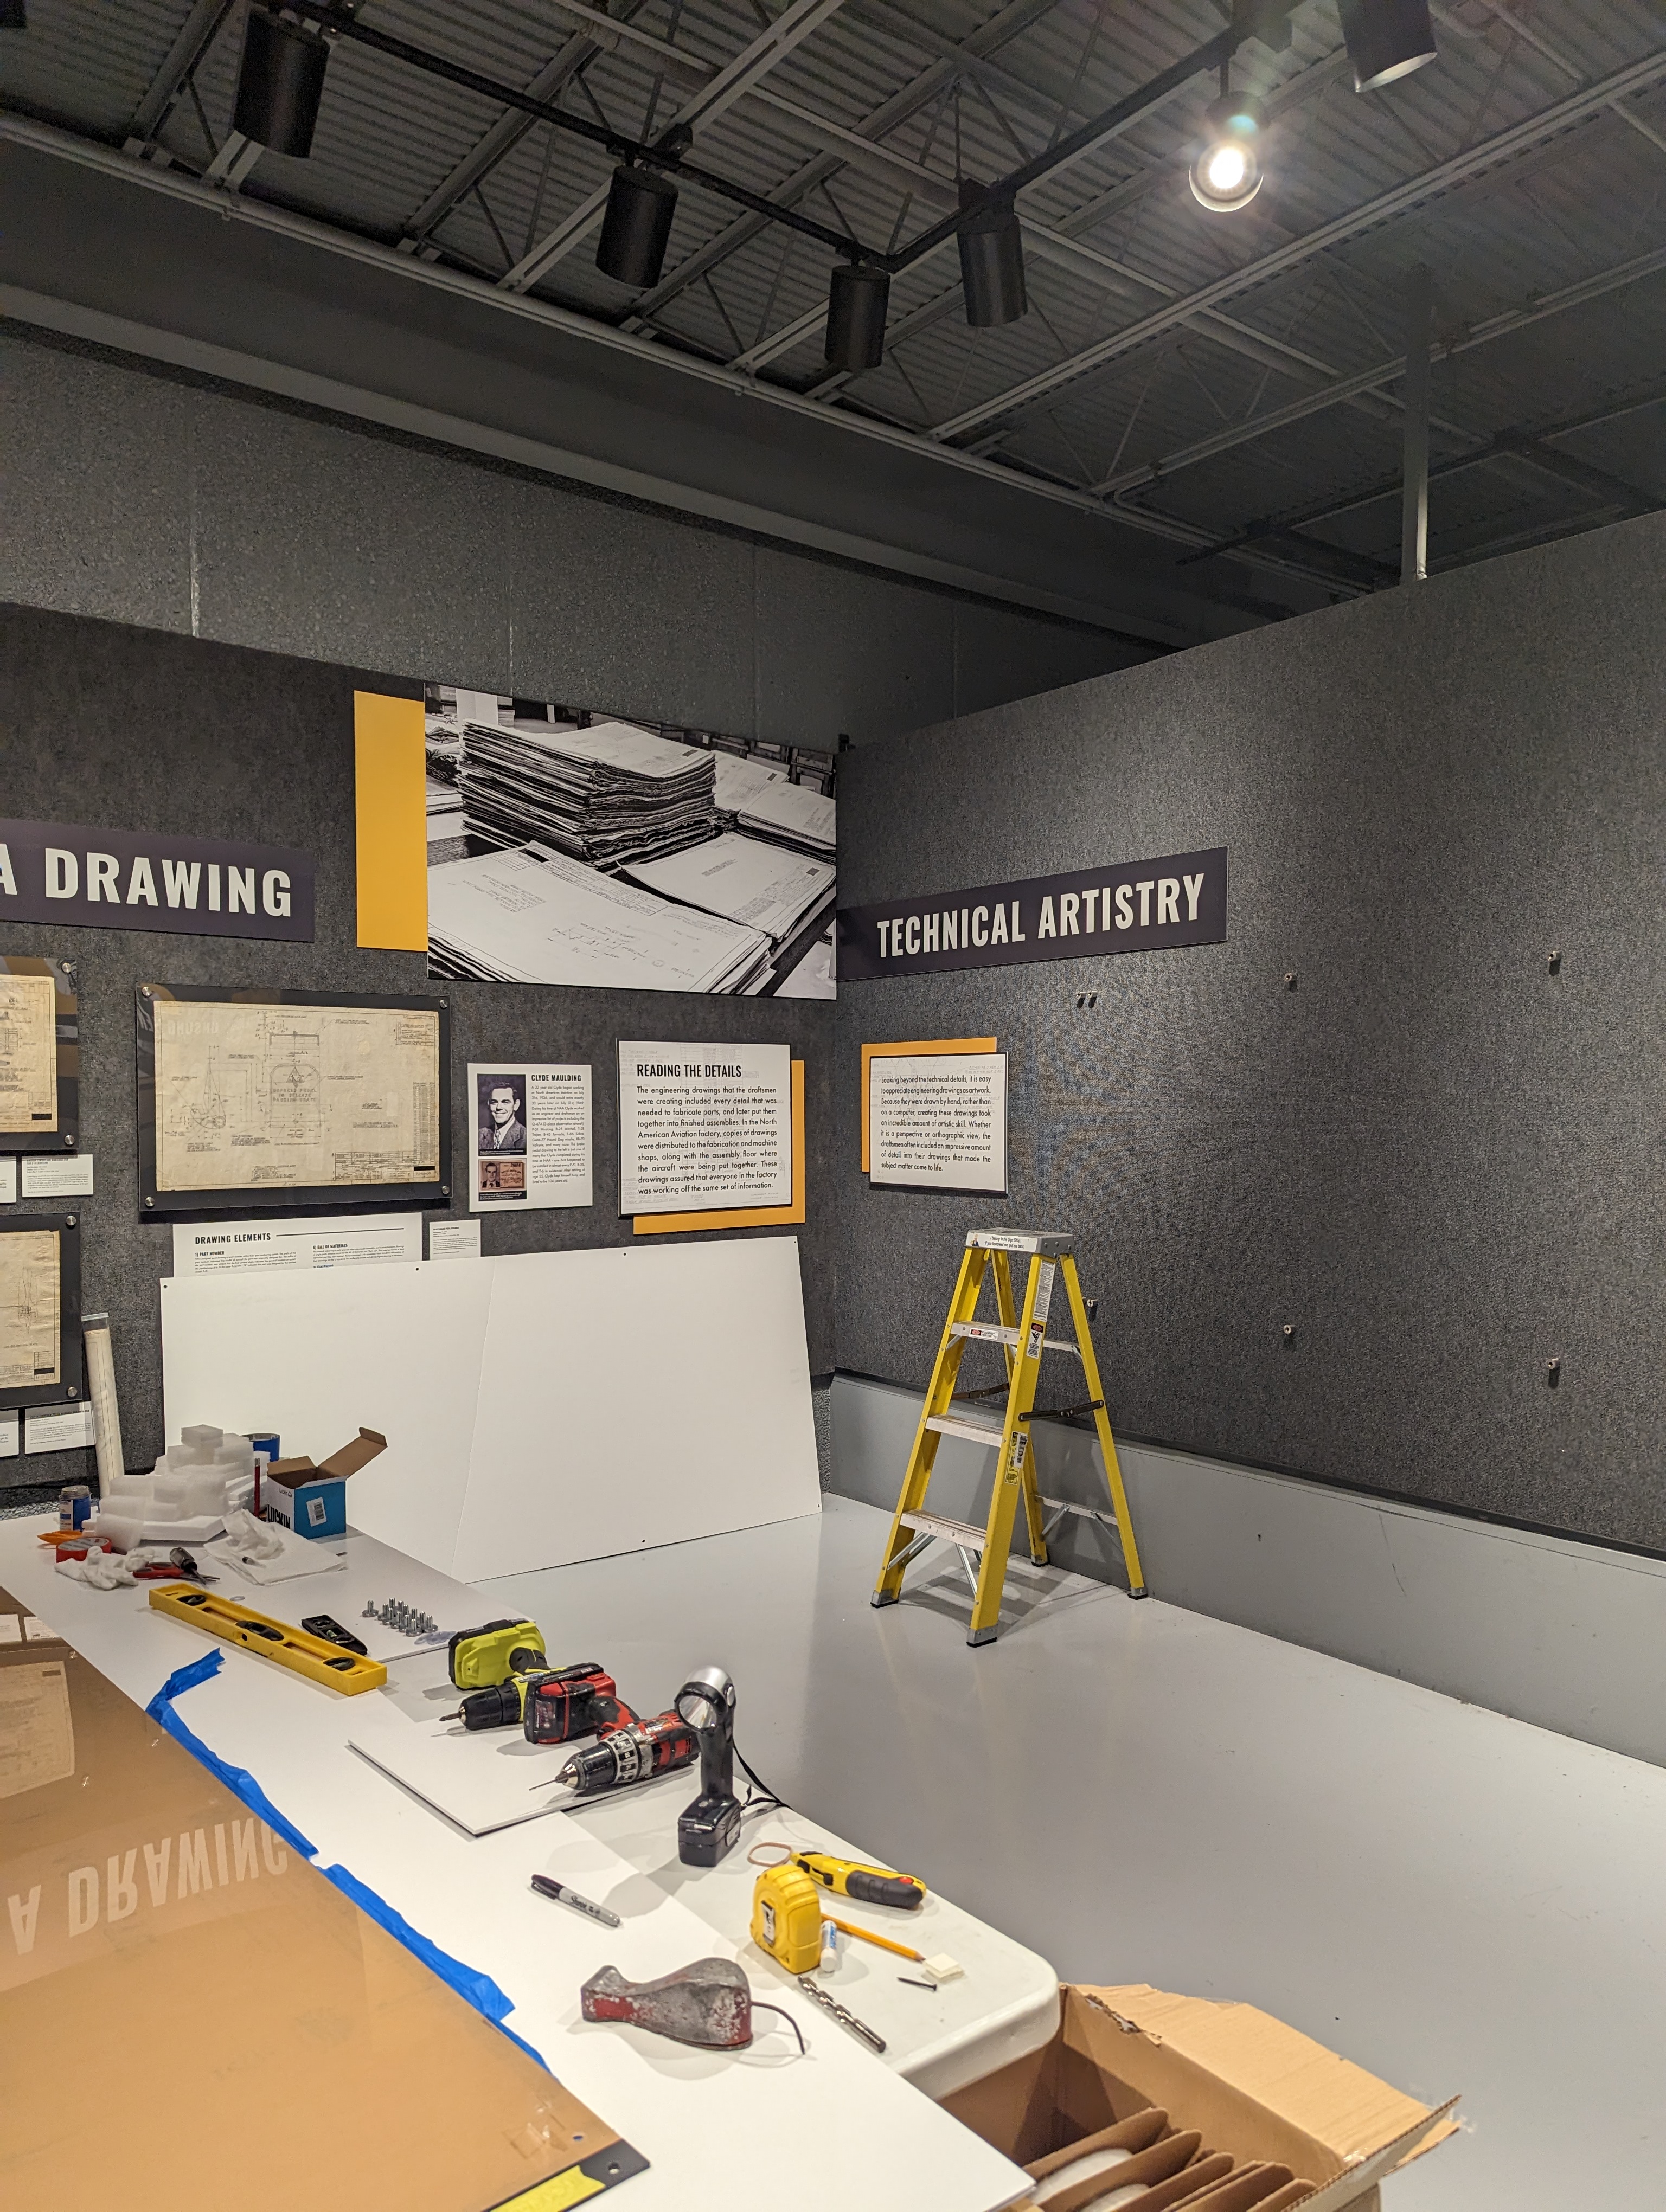 The exhibit begins to take shape as drawings and text panels are hung.